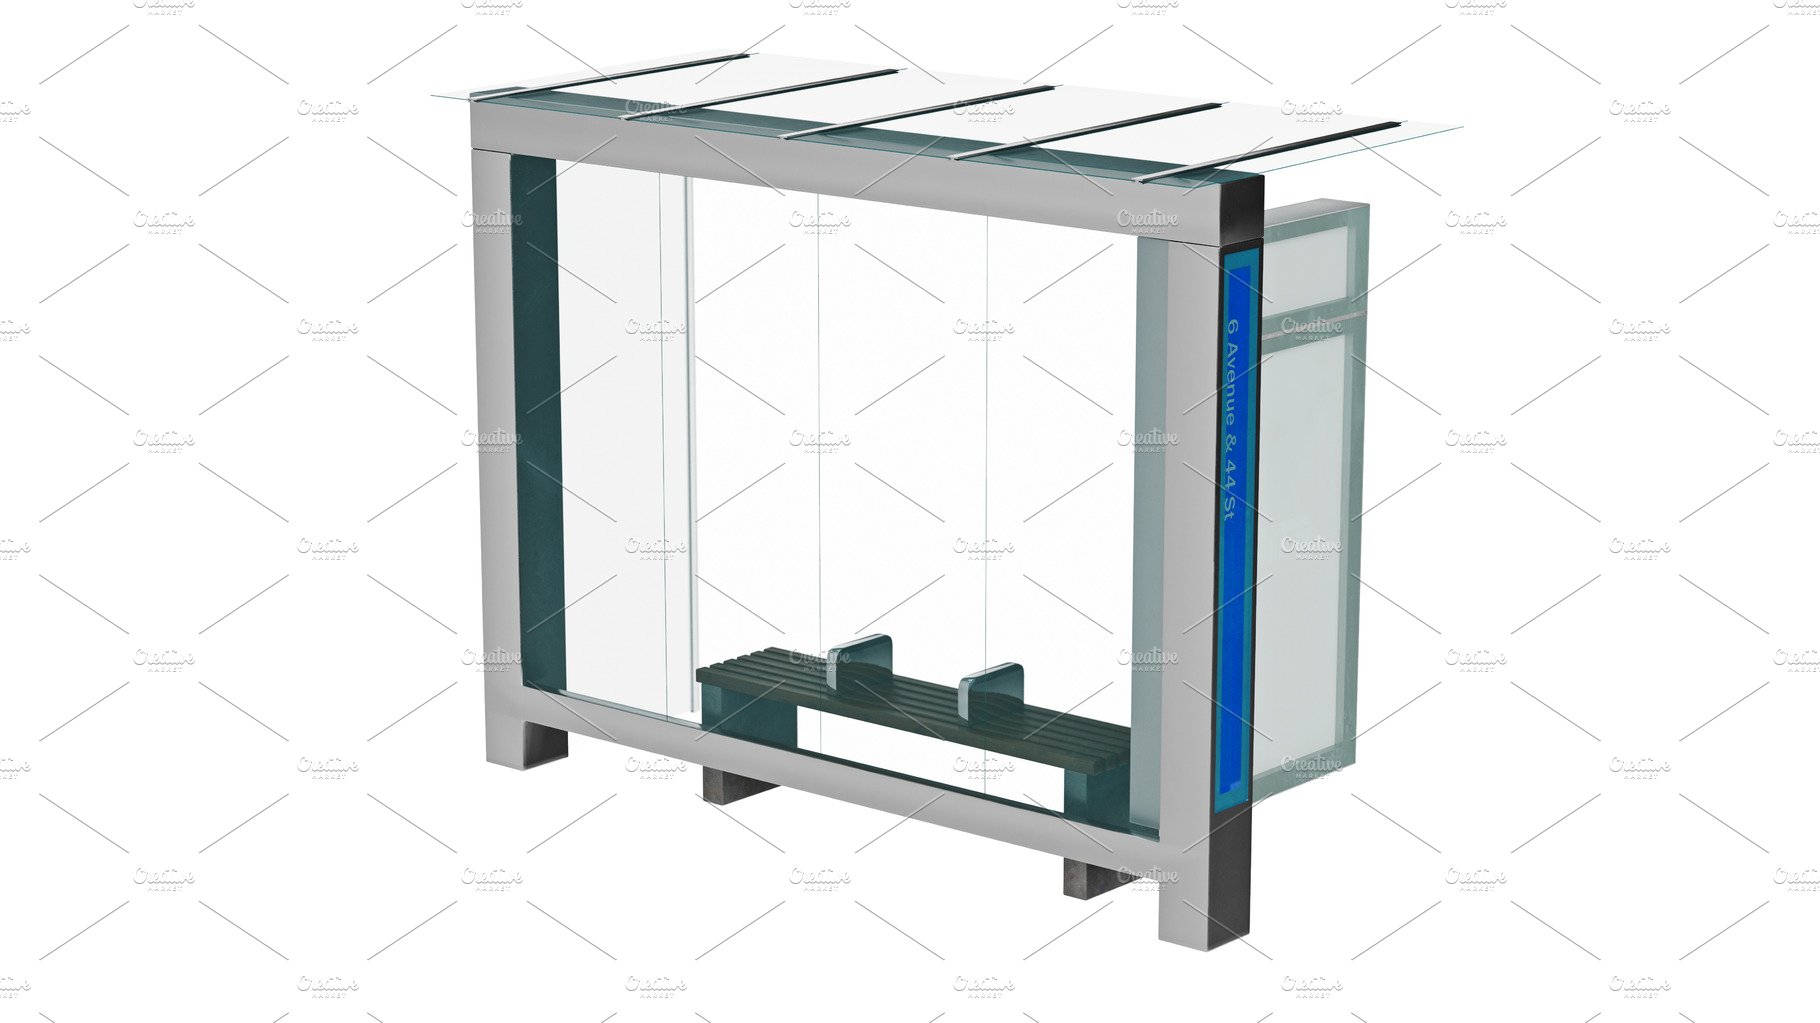 Bus stop shelter cover image.